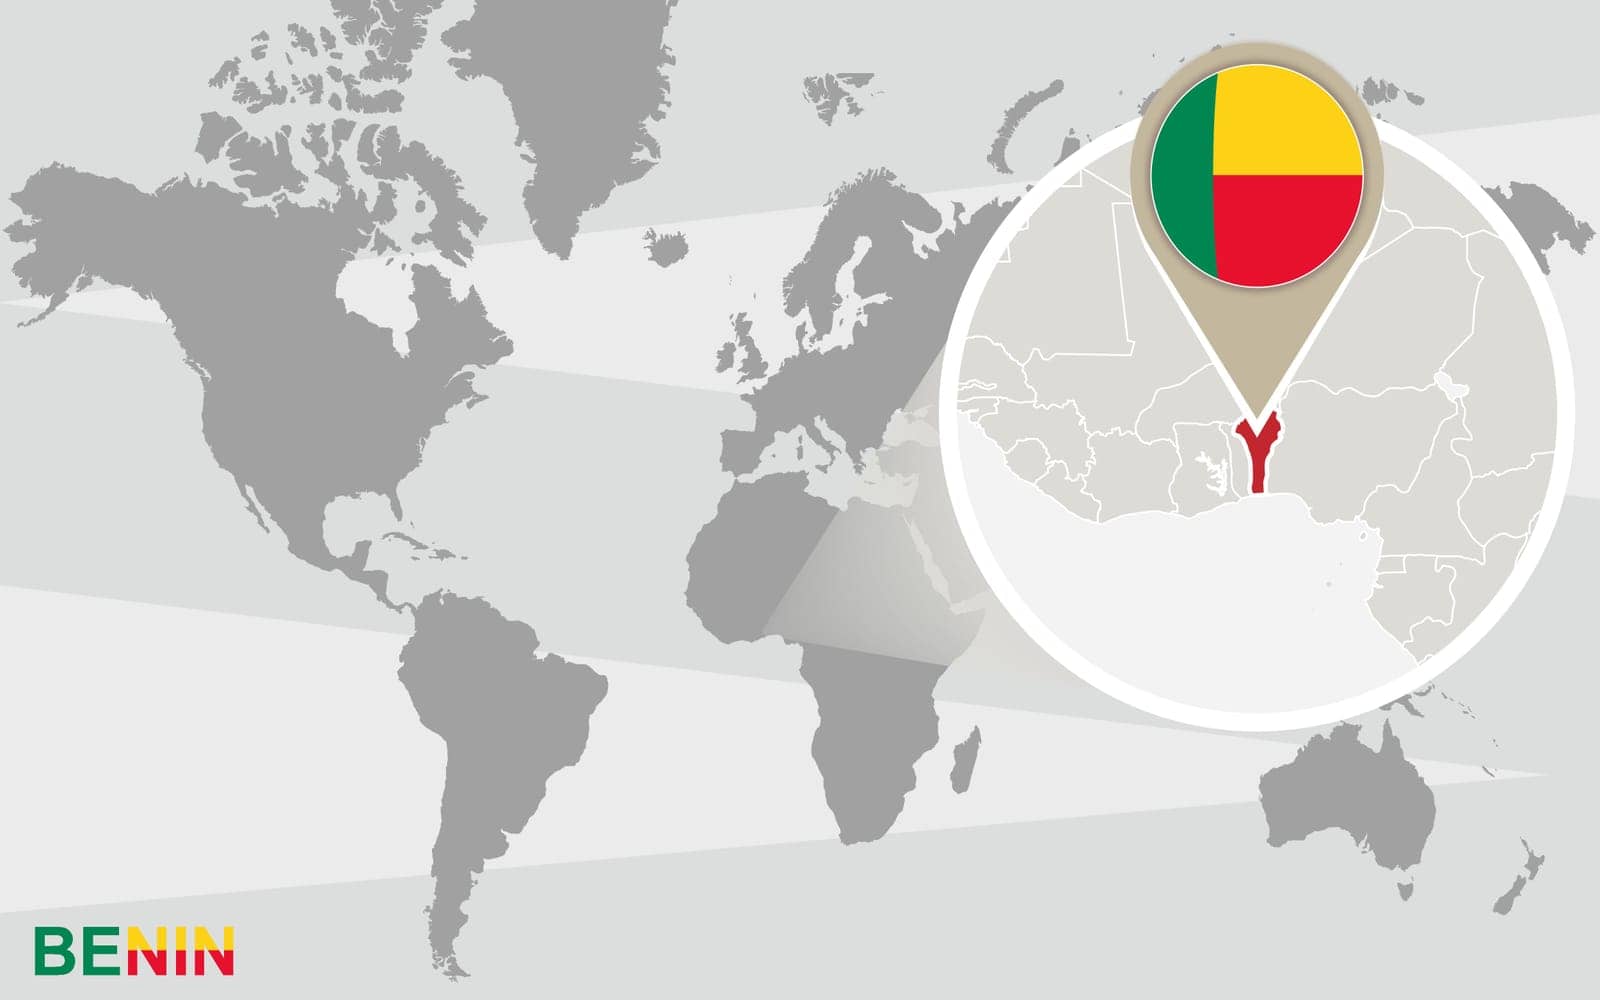 World map with magnified Benin. Benin flag and map.